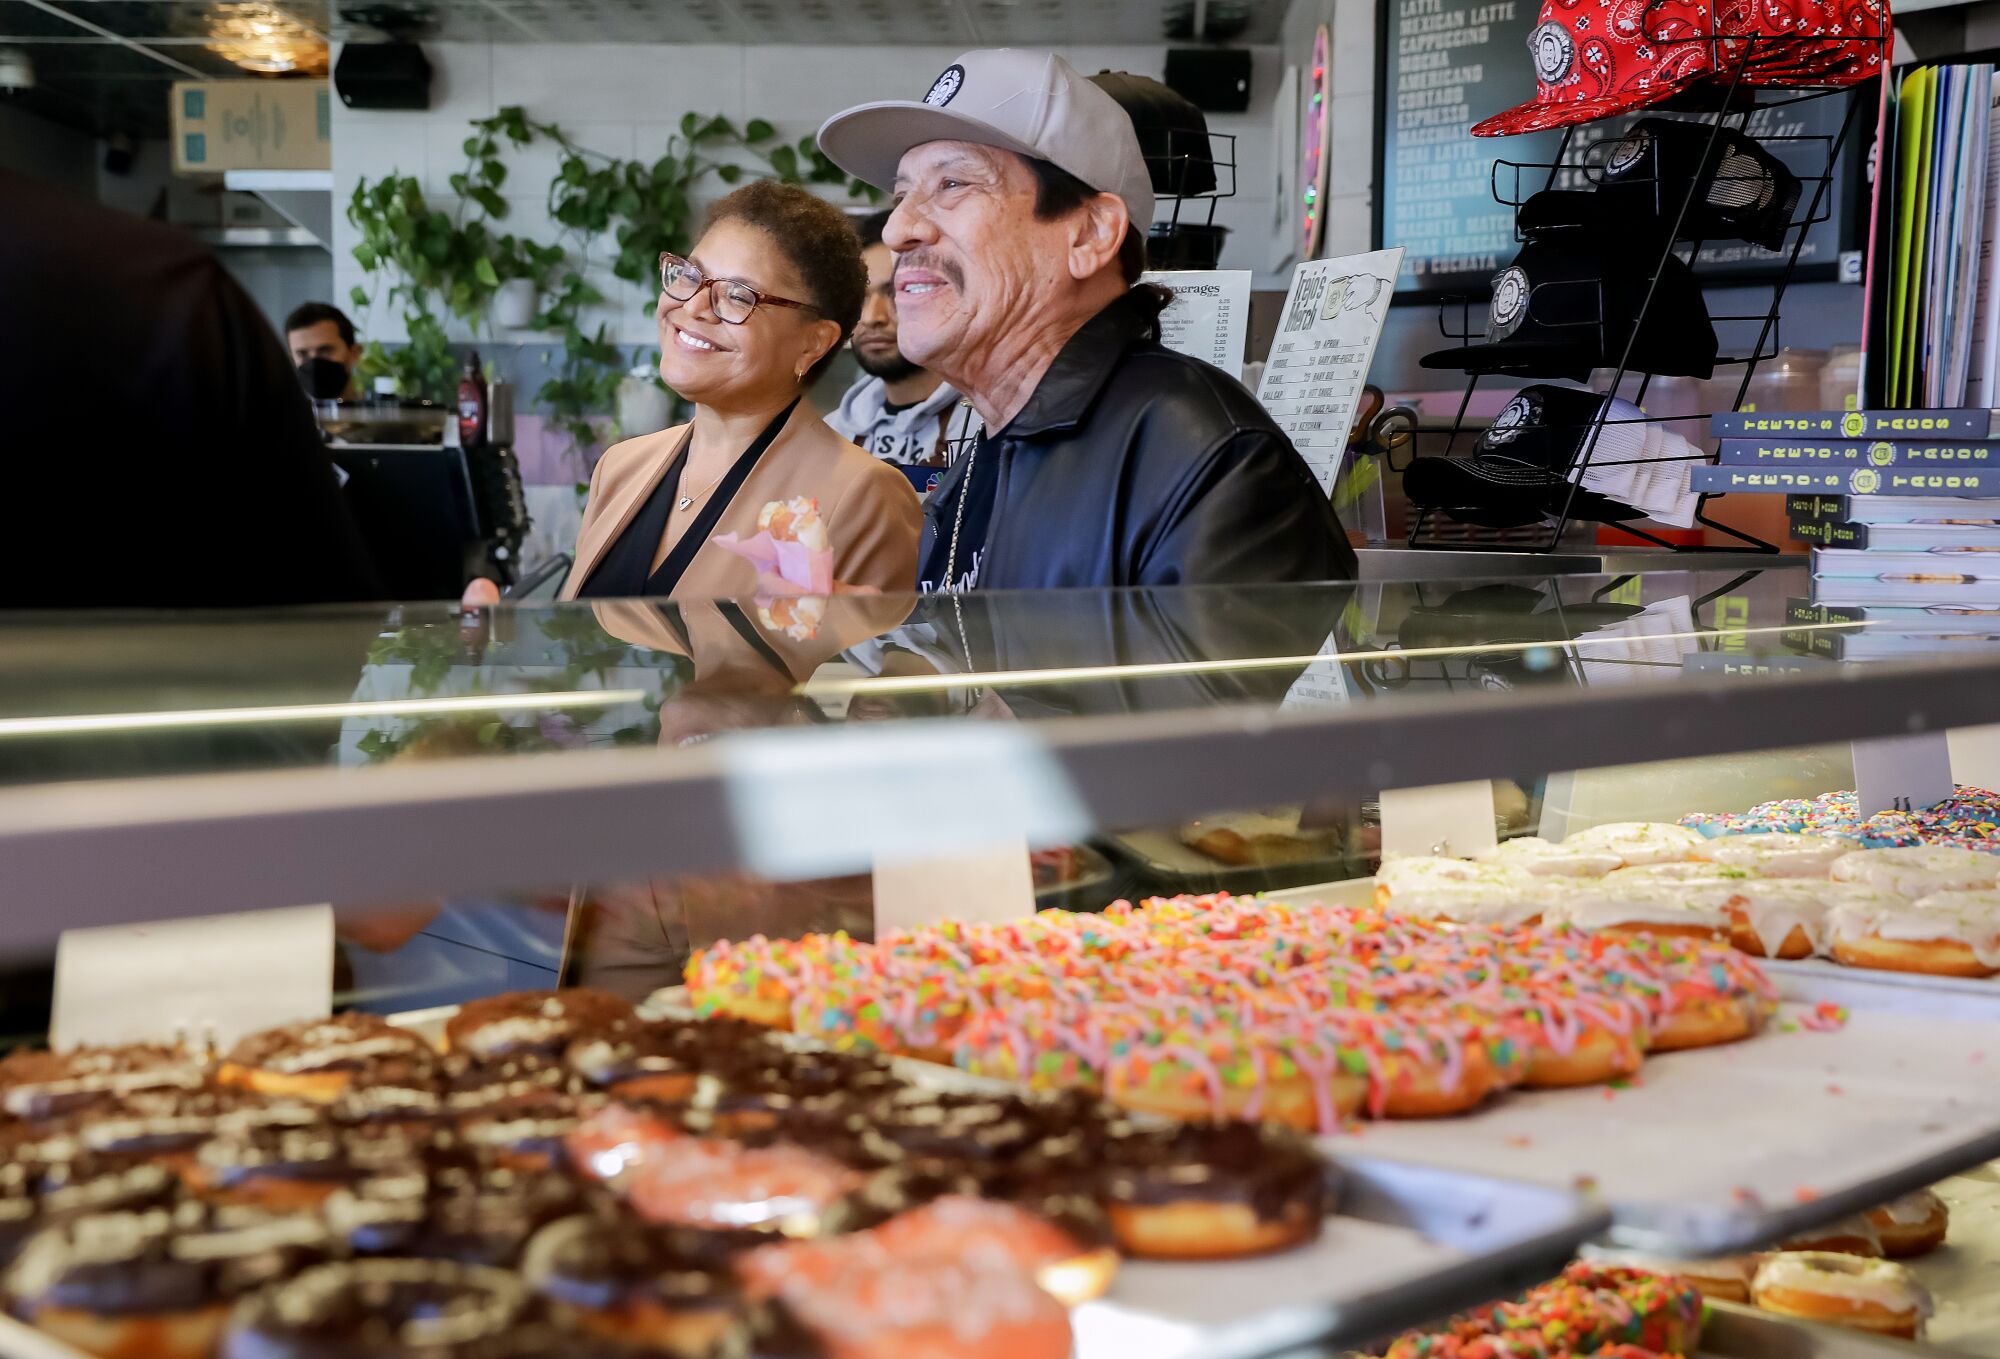 L.A. Mayoral candidate Karen Bass, left, meets with actor Danny Trejo, right, at Trejo's Coffee and Donuts